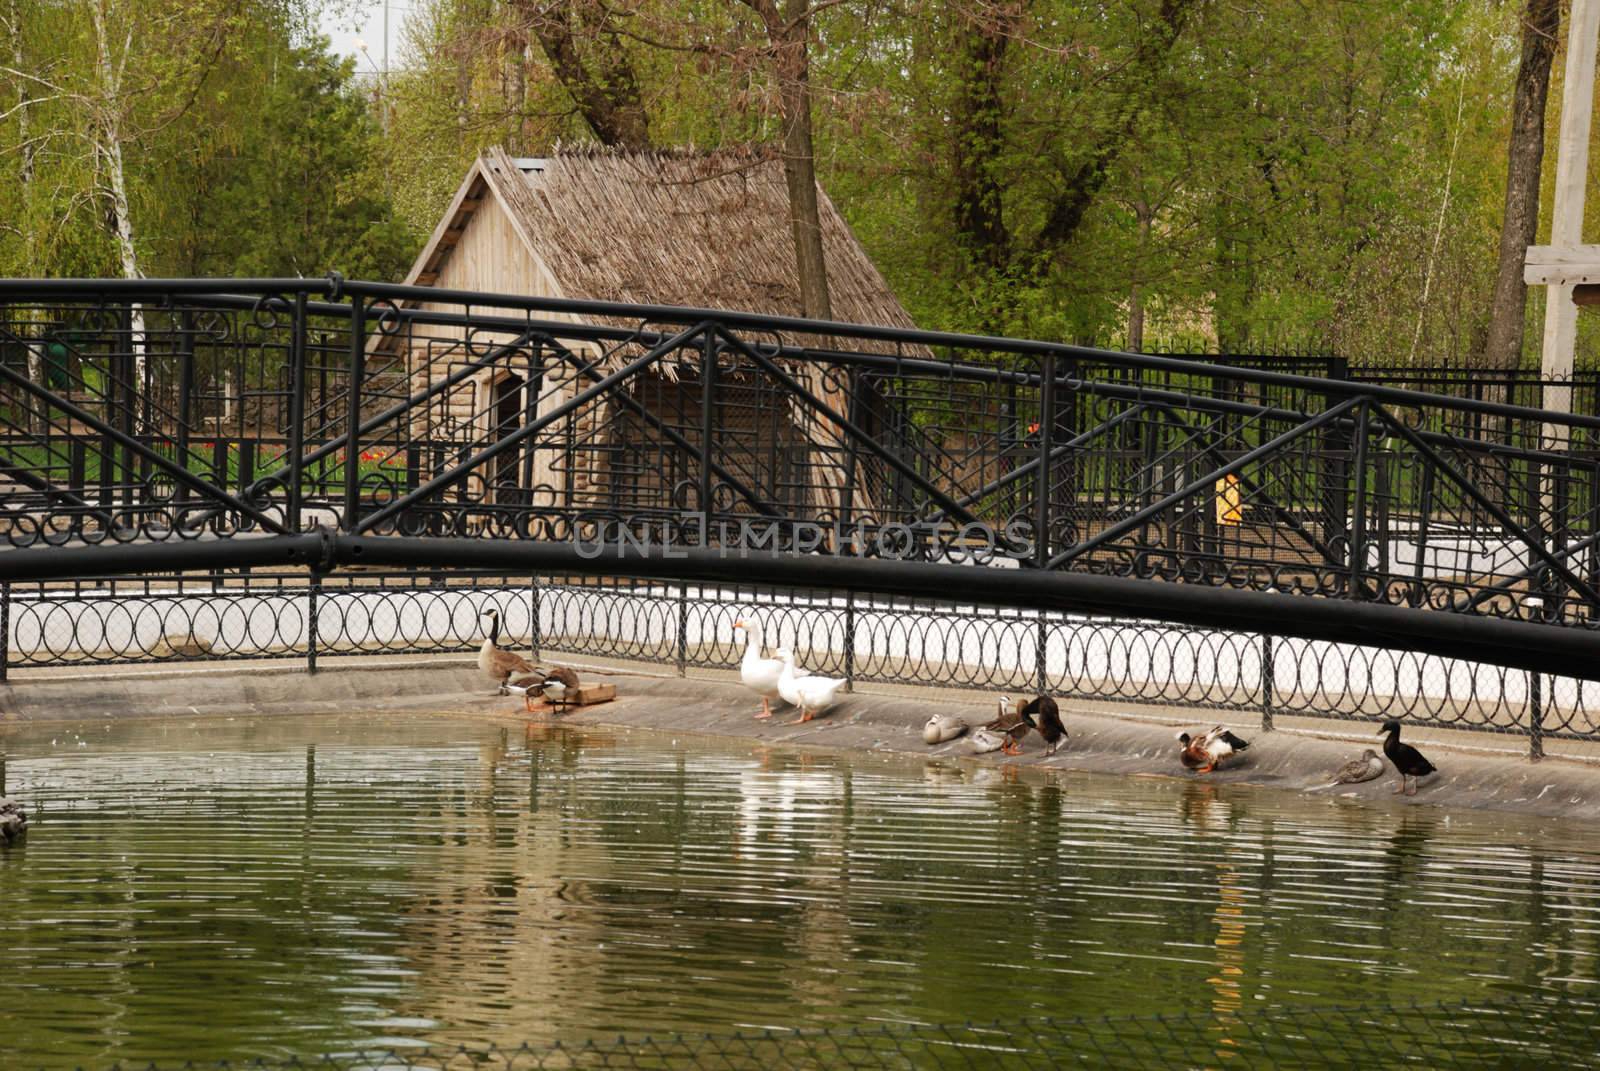 The bridge through a reservoir. Park with animals and ancient exterior